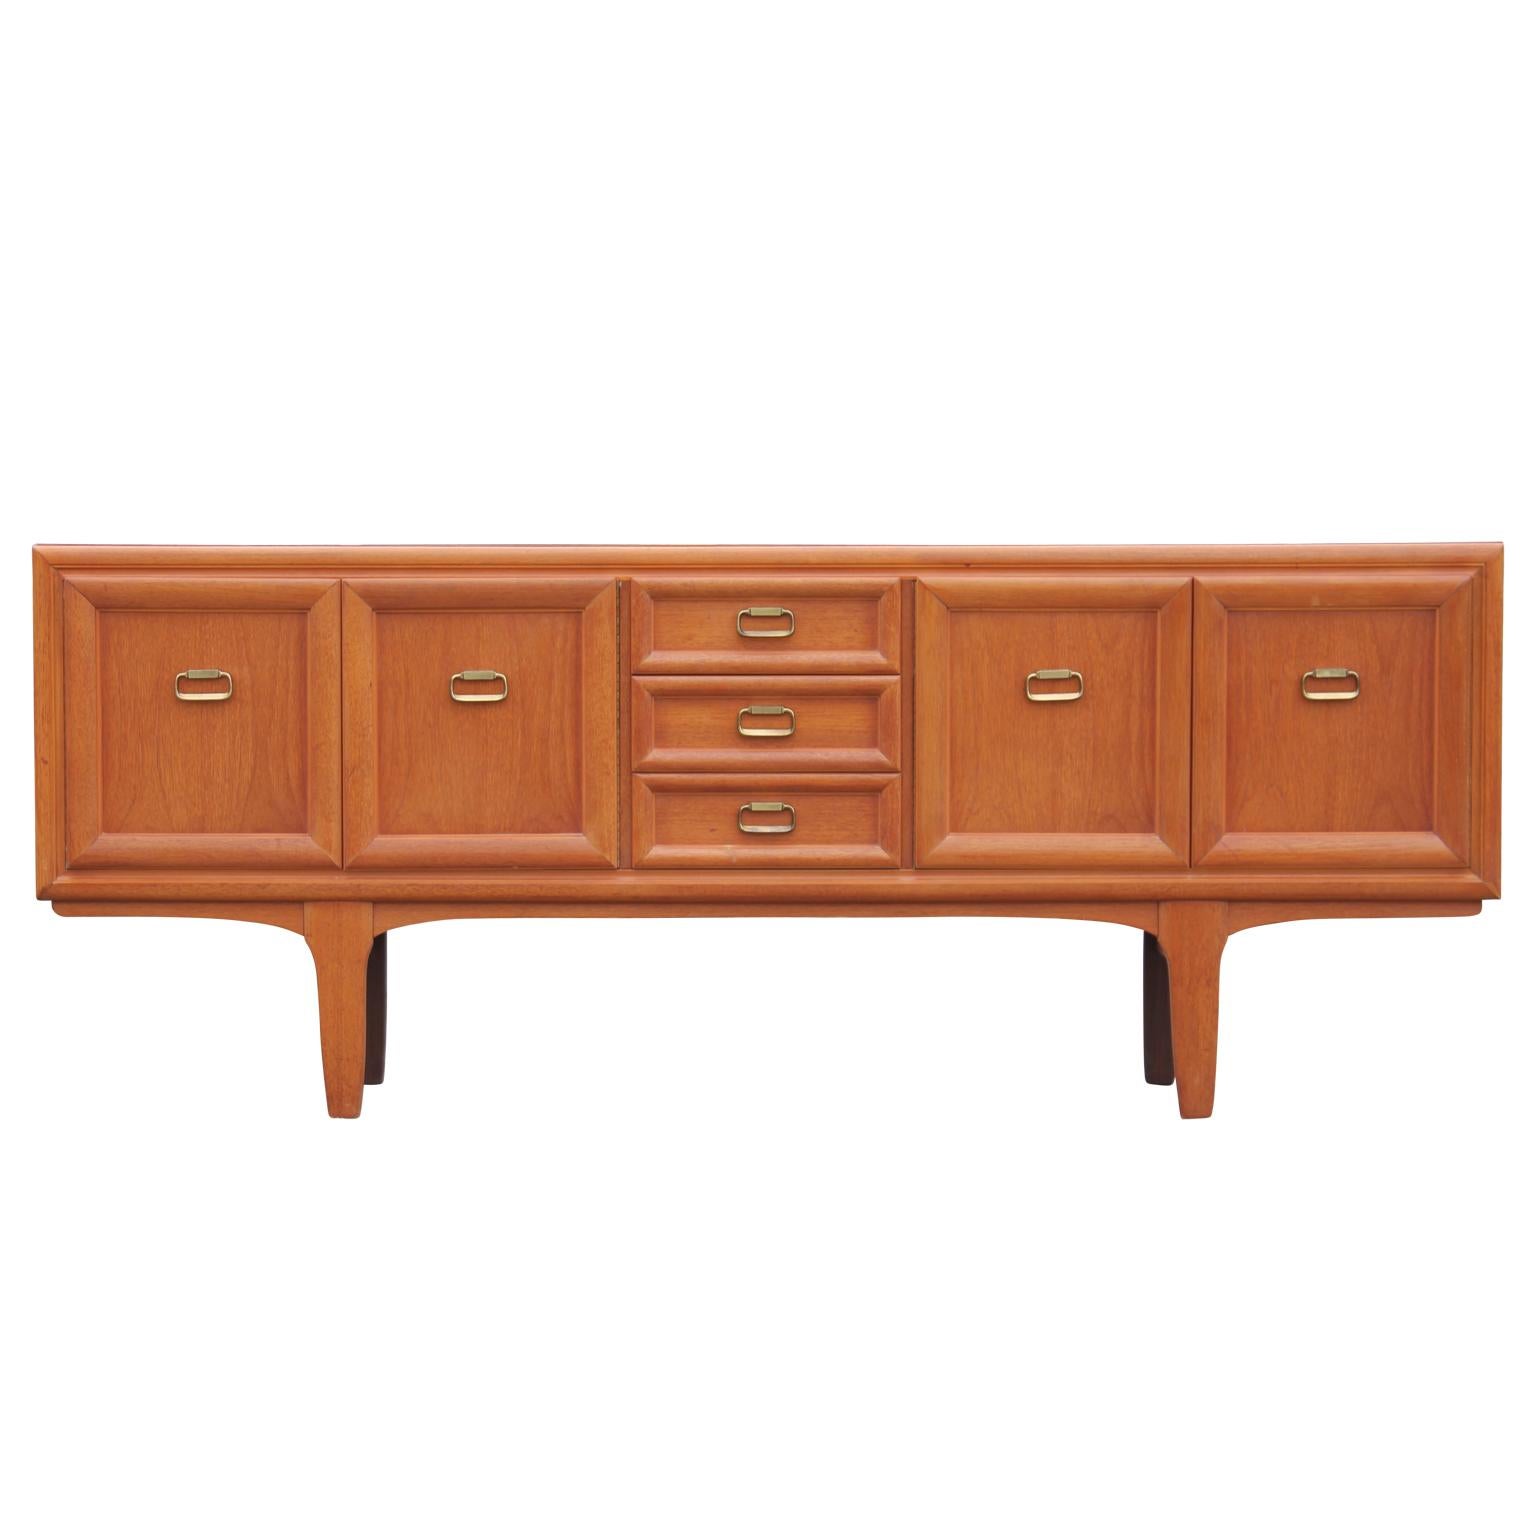 Beautiful modern Danish style teak sideboard or credenza with brass ring handles, circa 1960s.